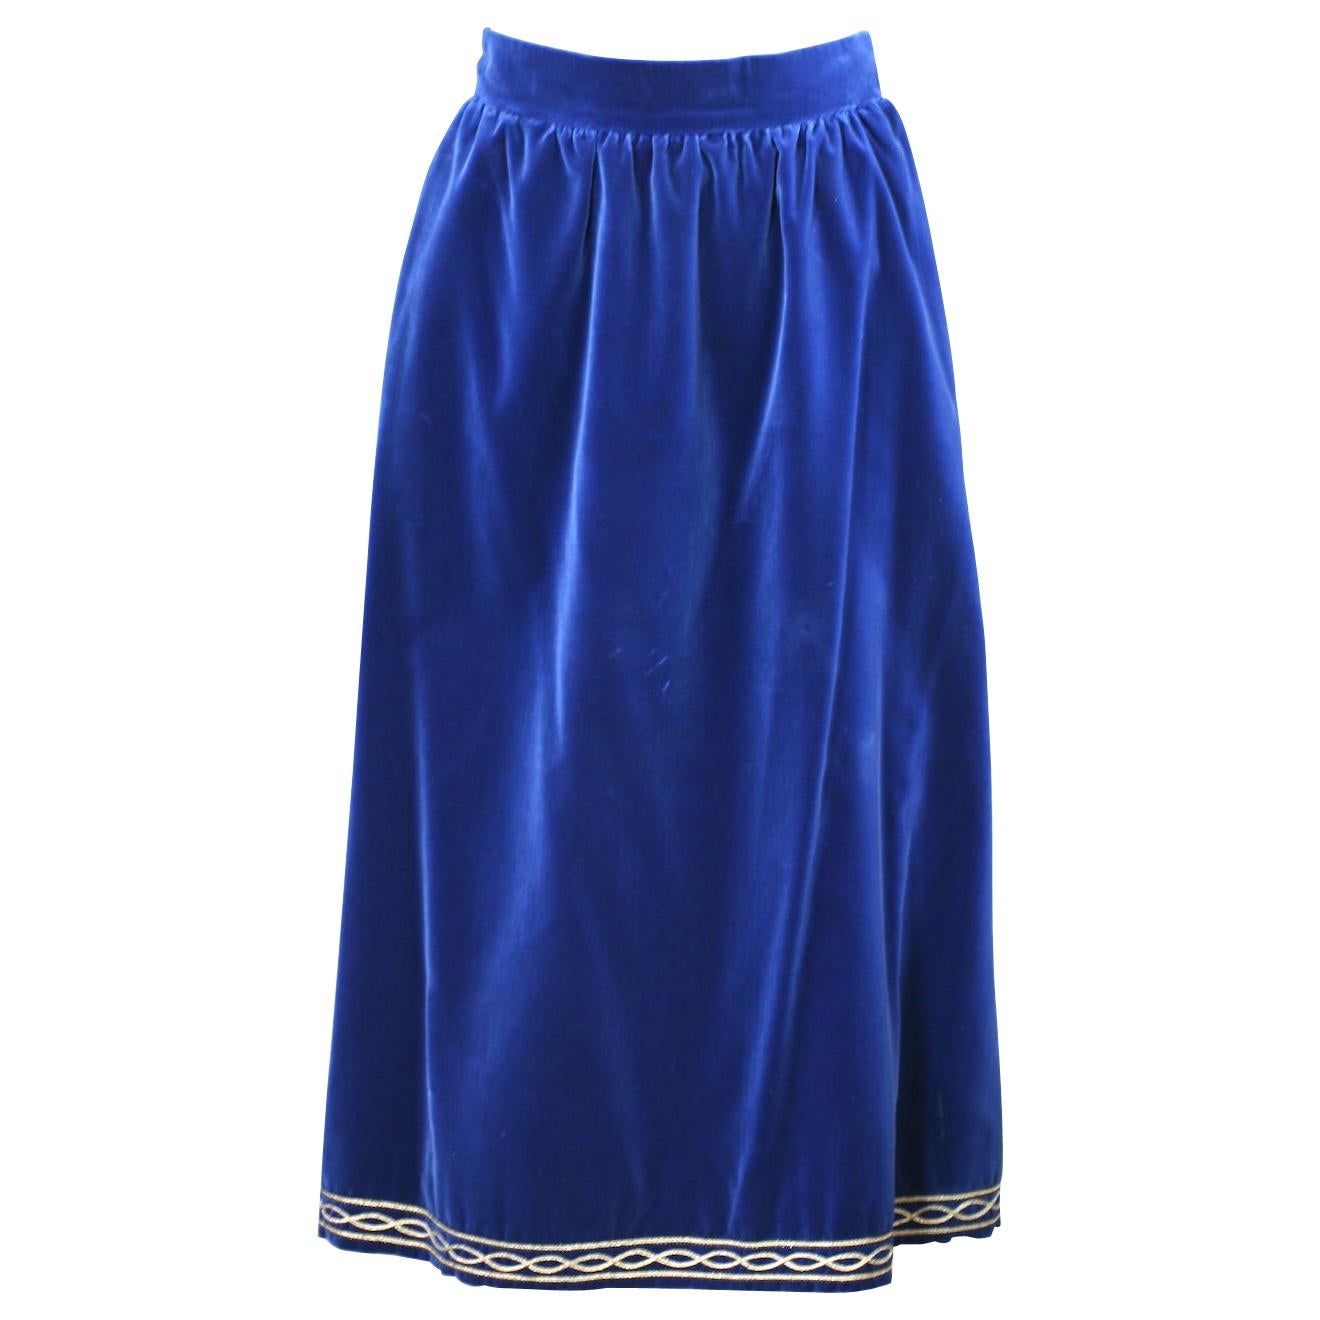 Yves Saint Laurent Russian Collection Skirt